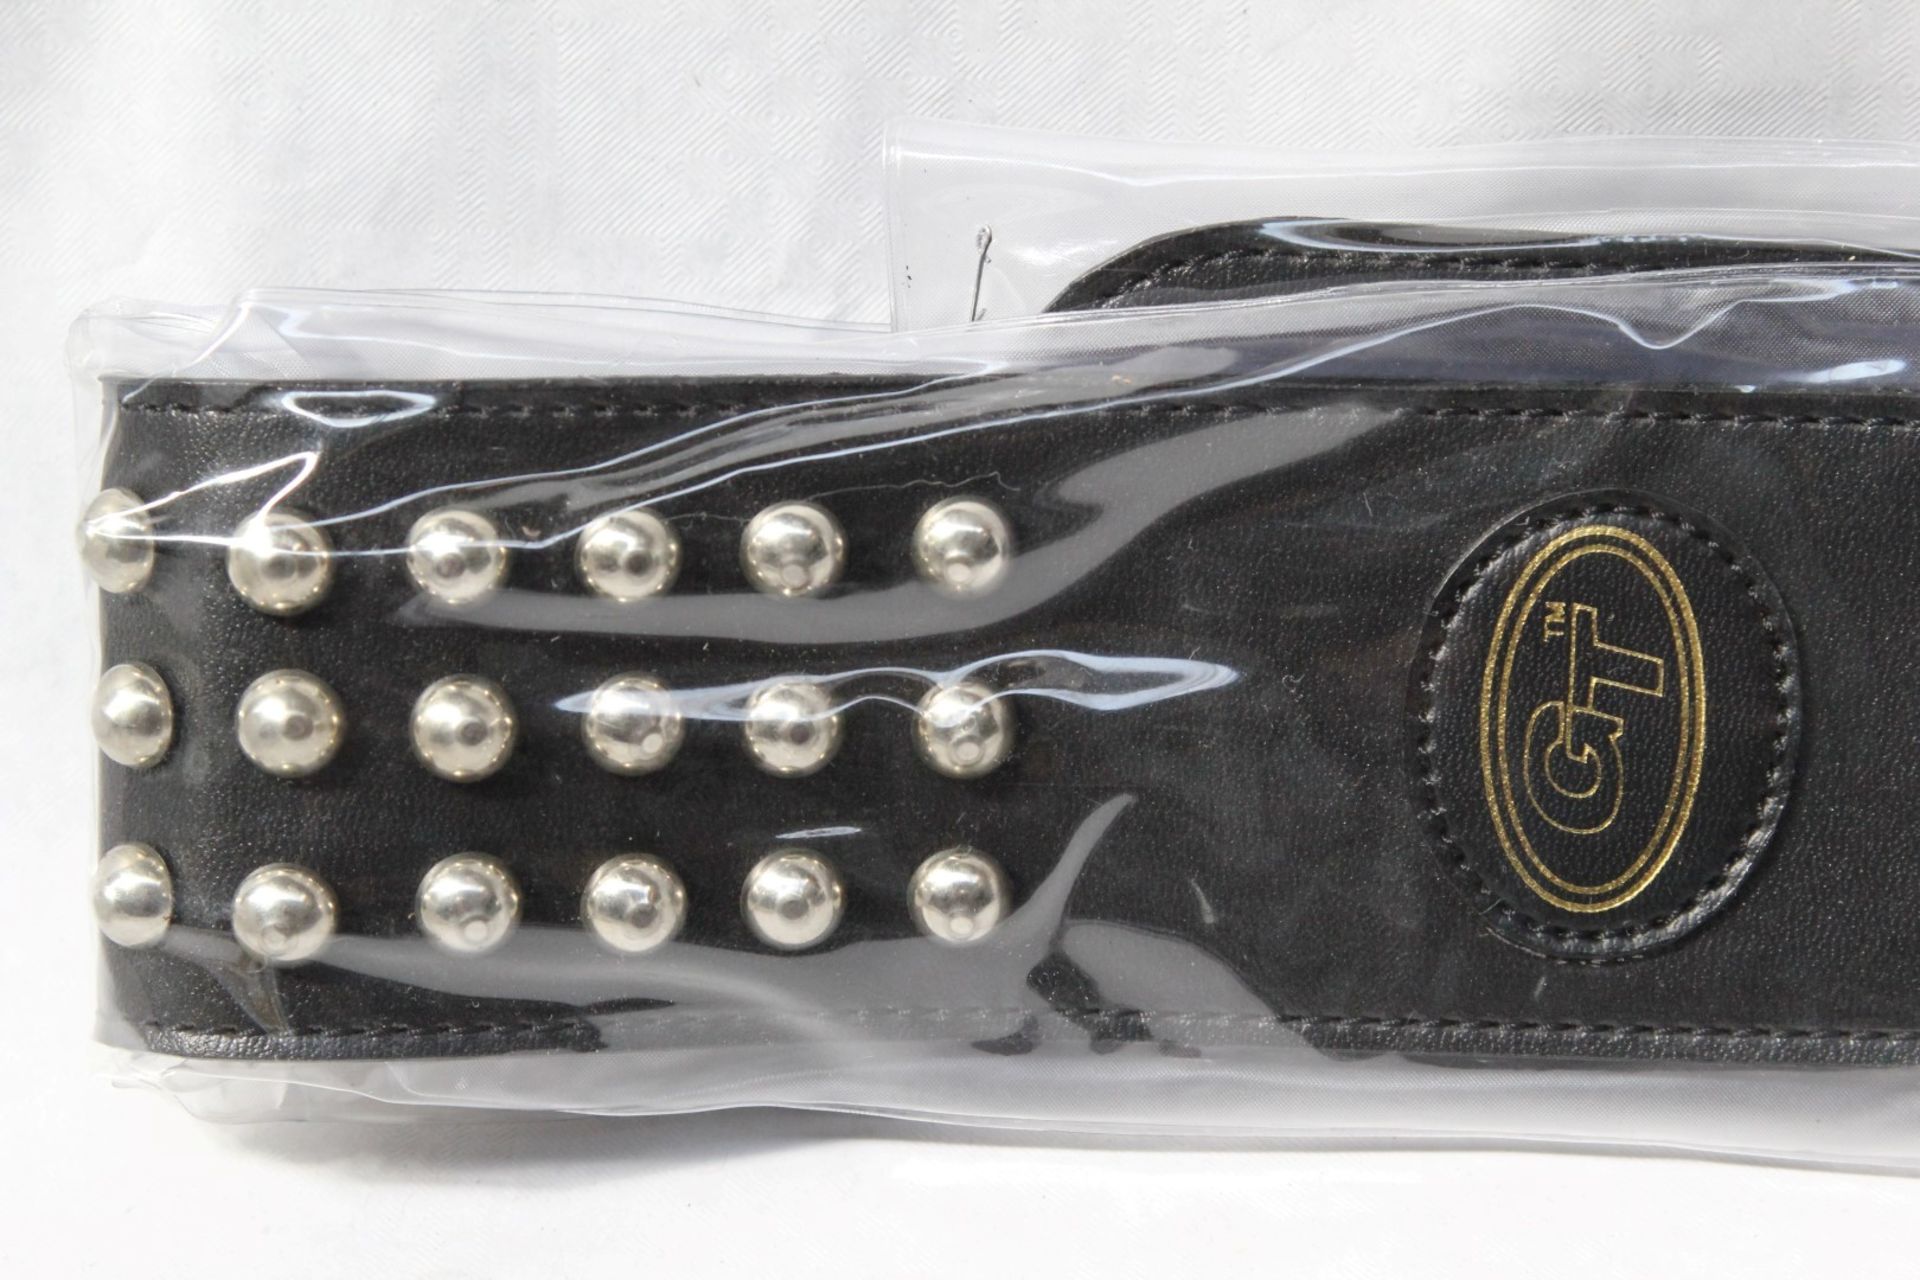 1 x Guitar Tech Leather Studded Guitar Strap - New in Packet - CL020 - Ref Pro173 - Location: Altrin - Image 4 of 8